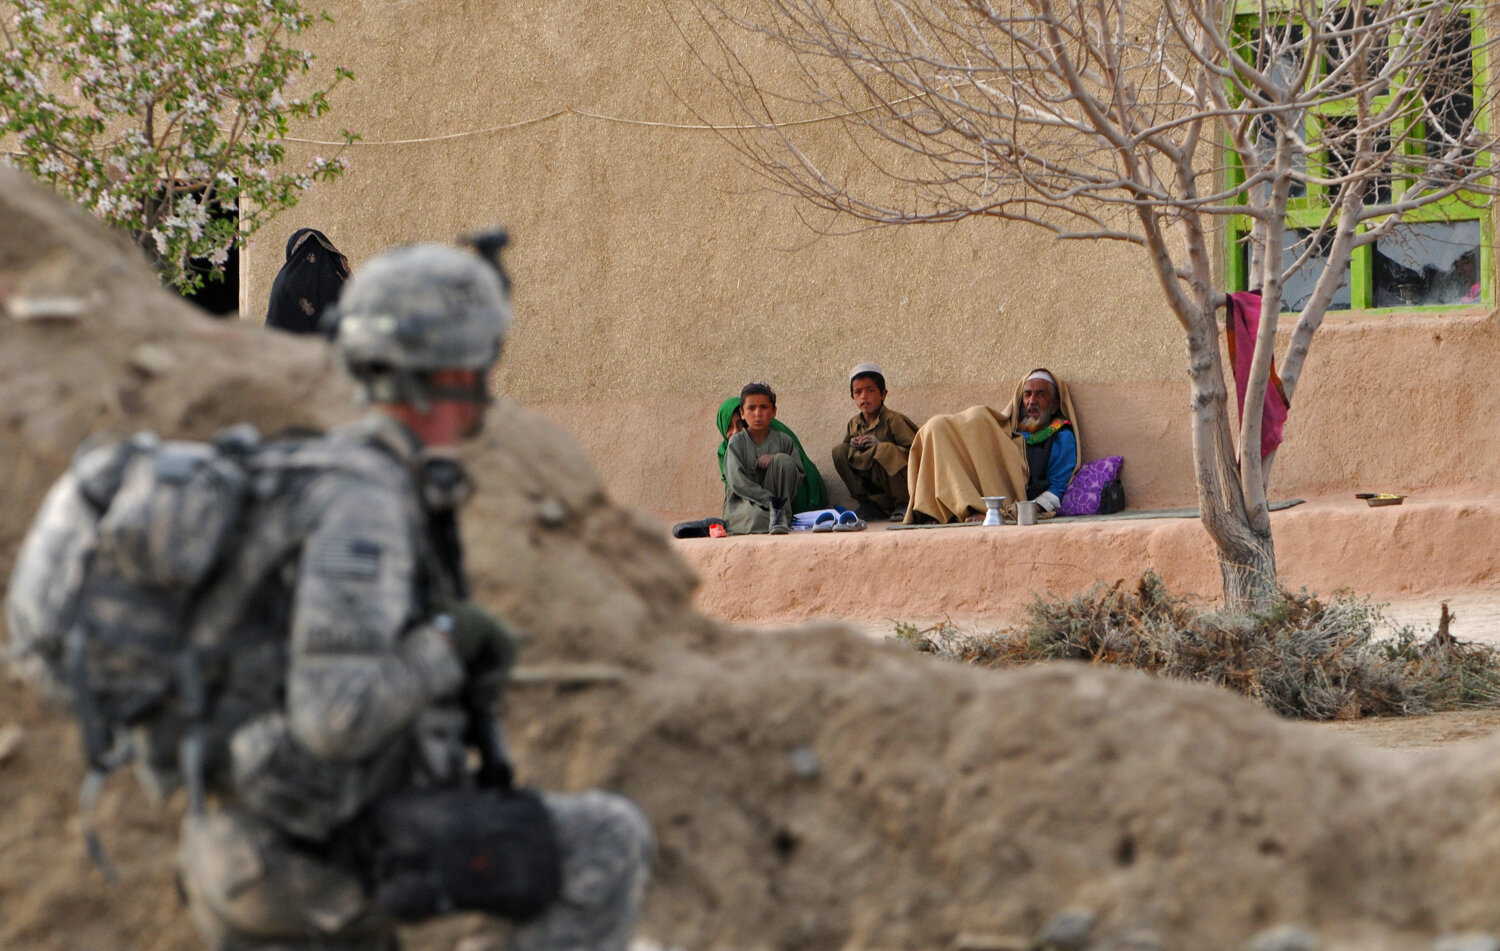  AUS soldier from 1st Platoon Alpha Company 3-187 3BCT 101 Airborne takes position as an Afghan family look at him from their house during a patrolling in Yosef Khel district of Paktika province on April 1, 2010. Orphans carry their chairs to prepare